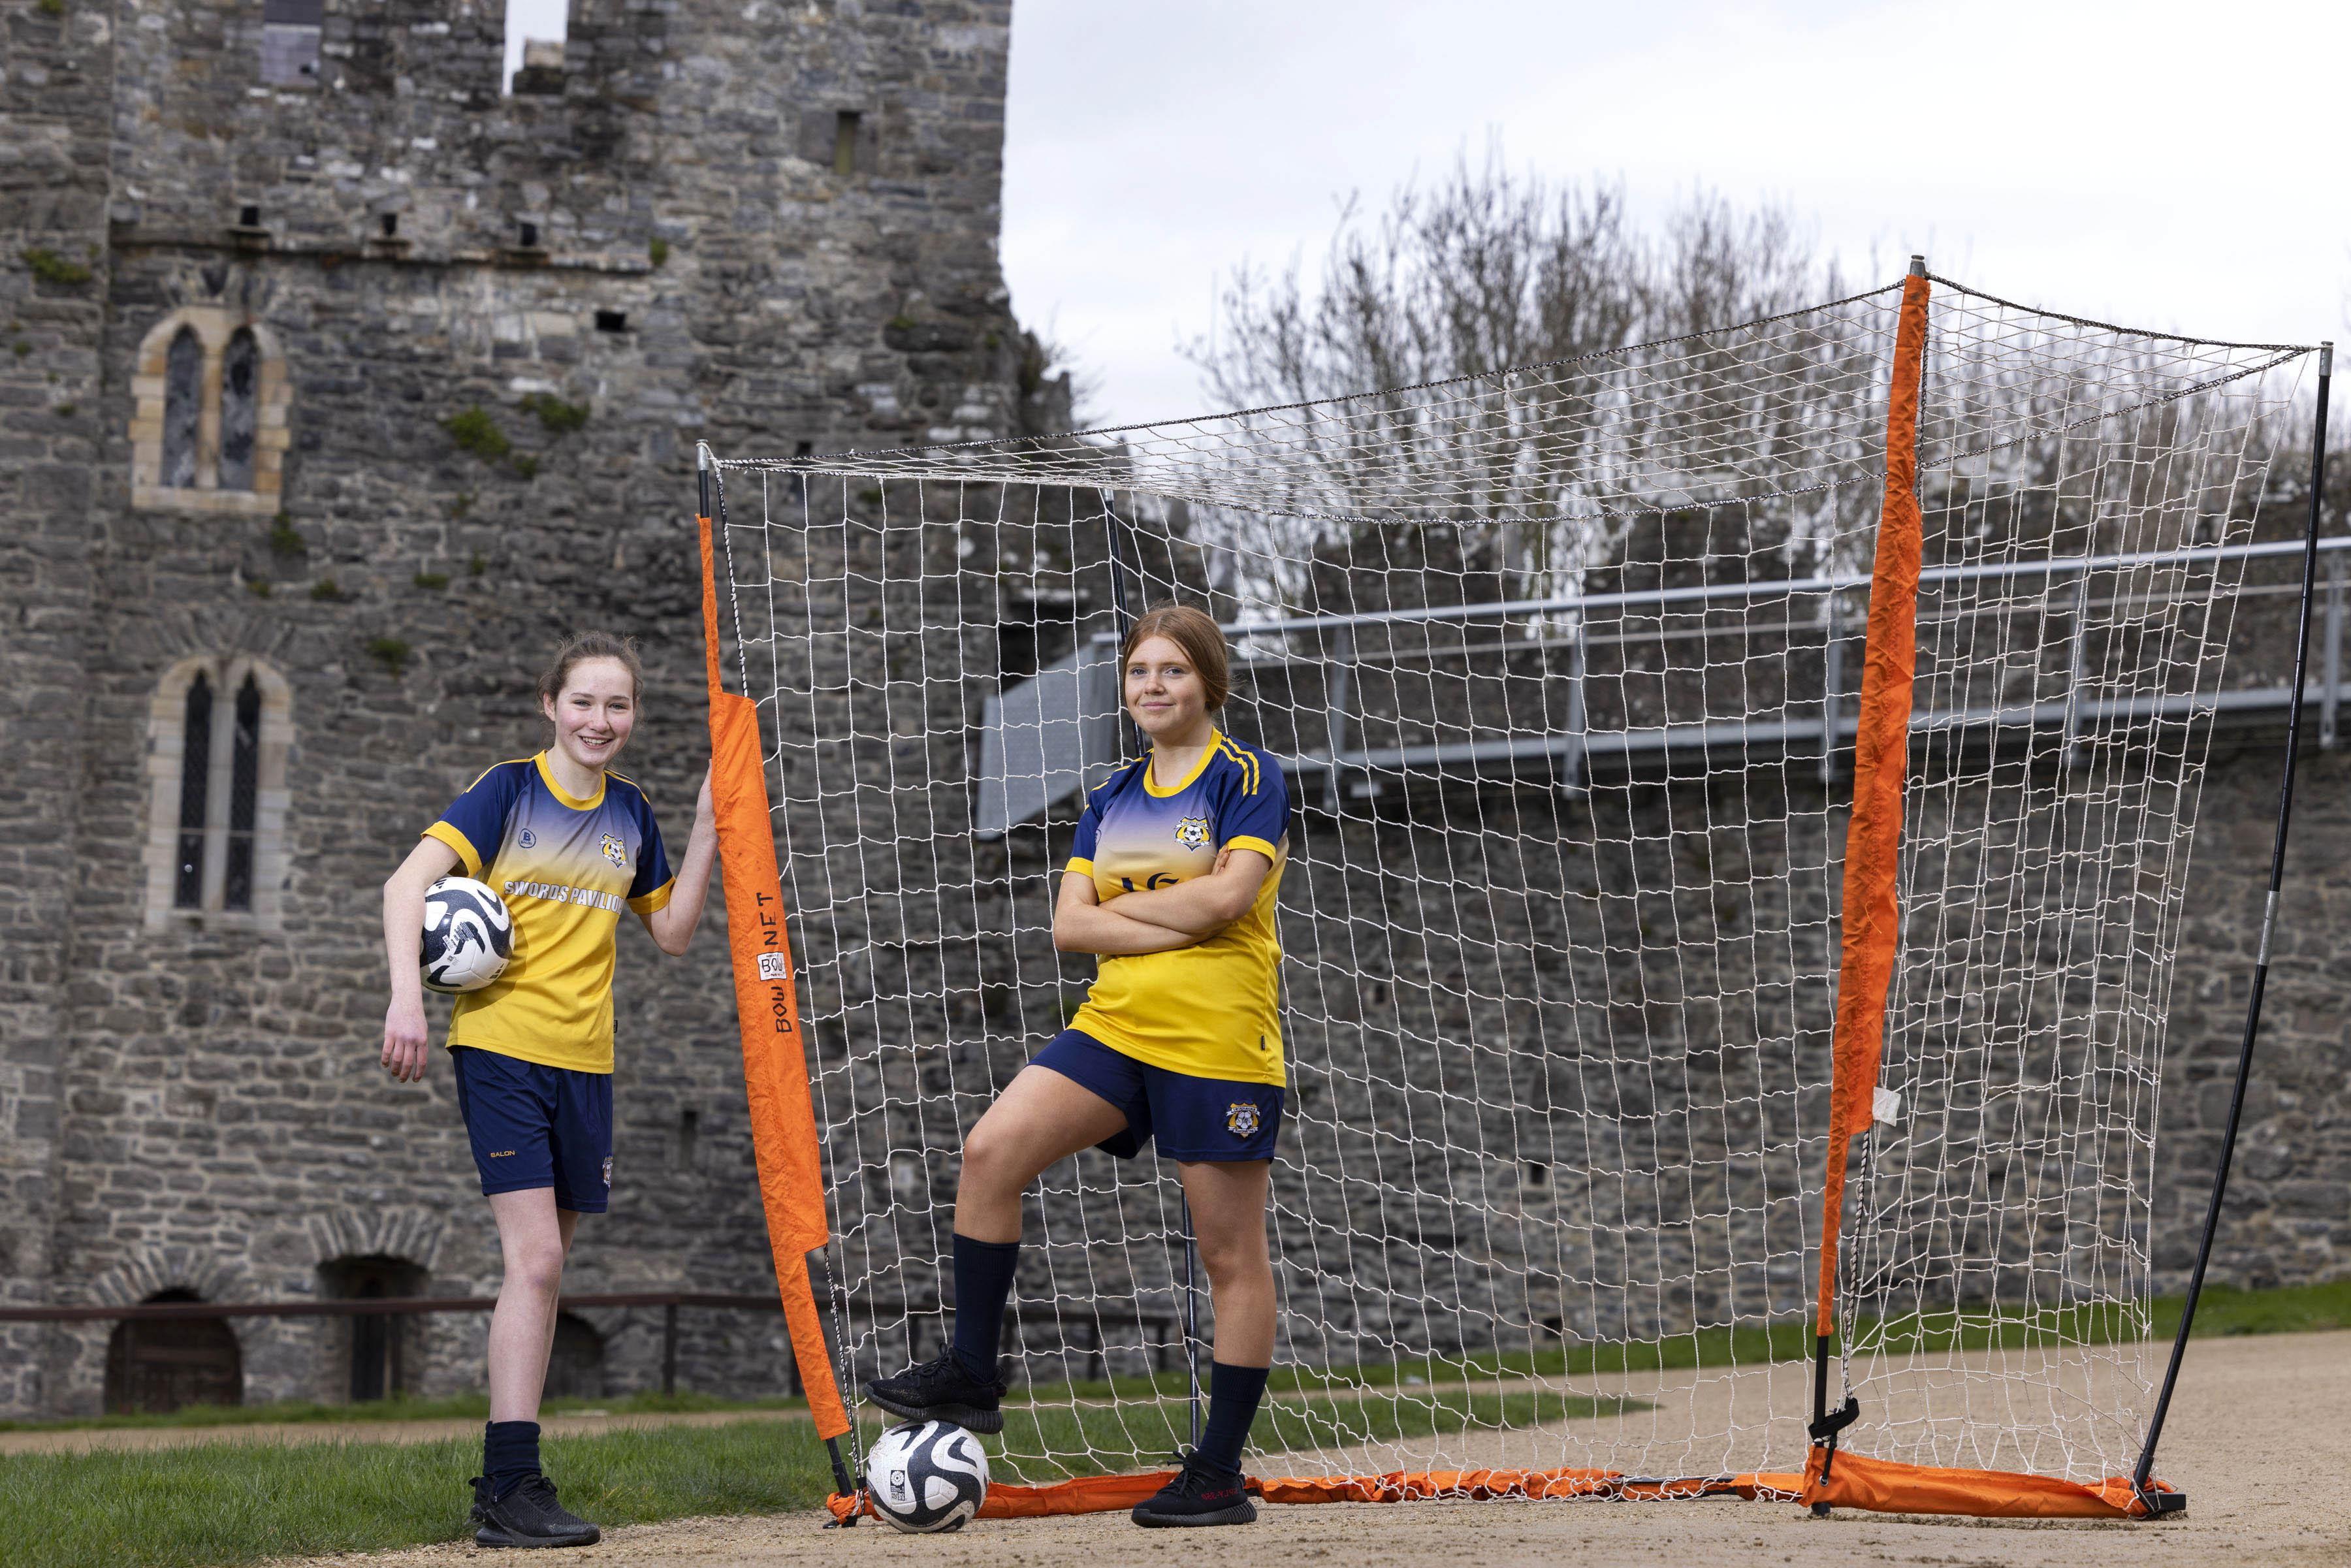 The course will help further strengthen the player pathway for girls